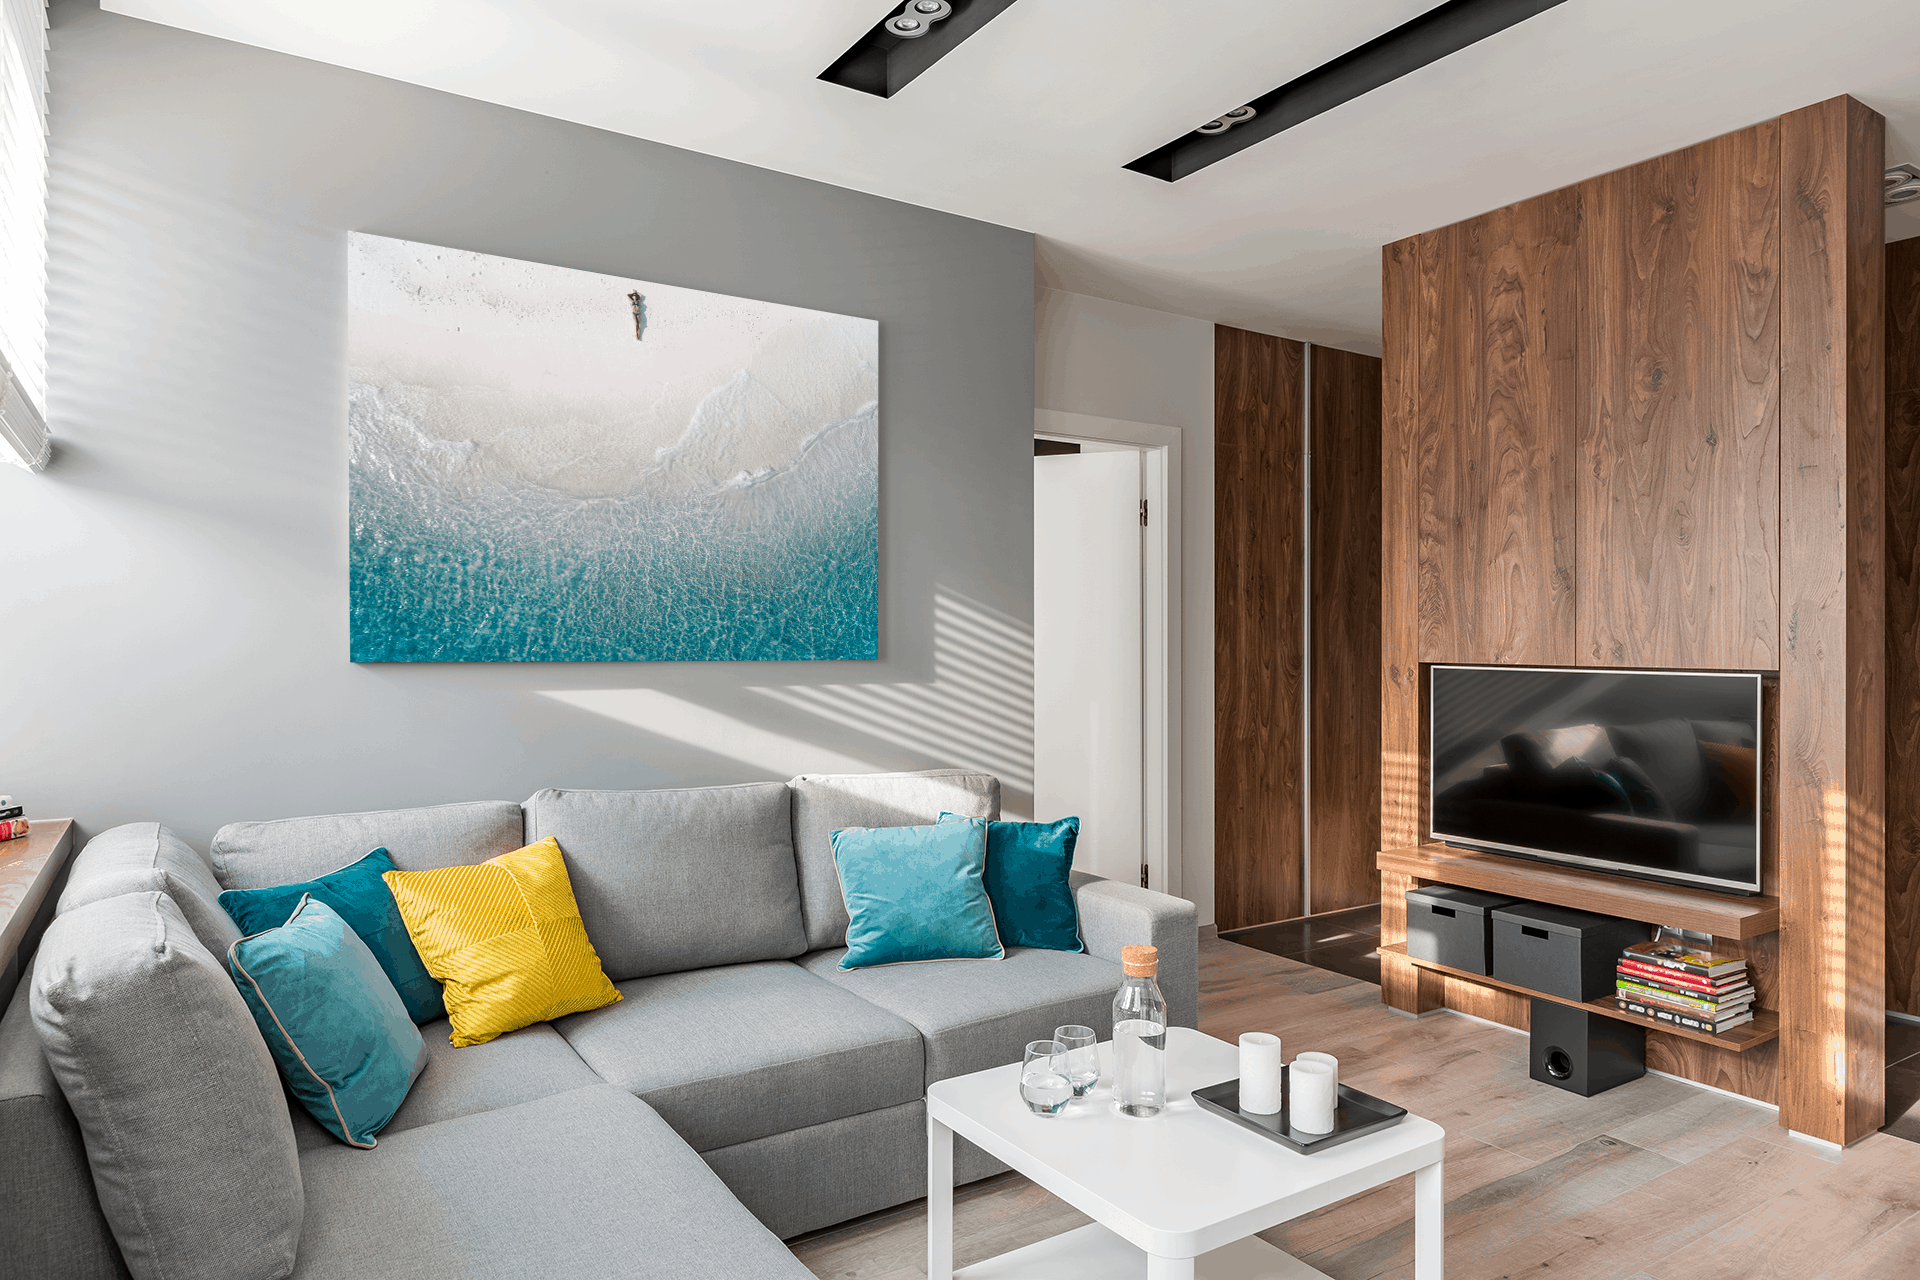 Large Canvas Pictures For Living Room